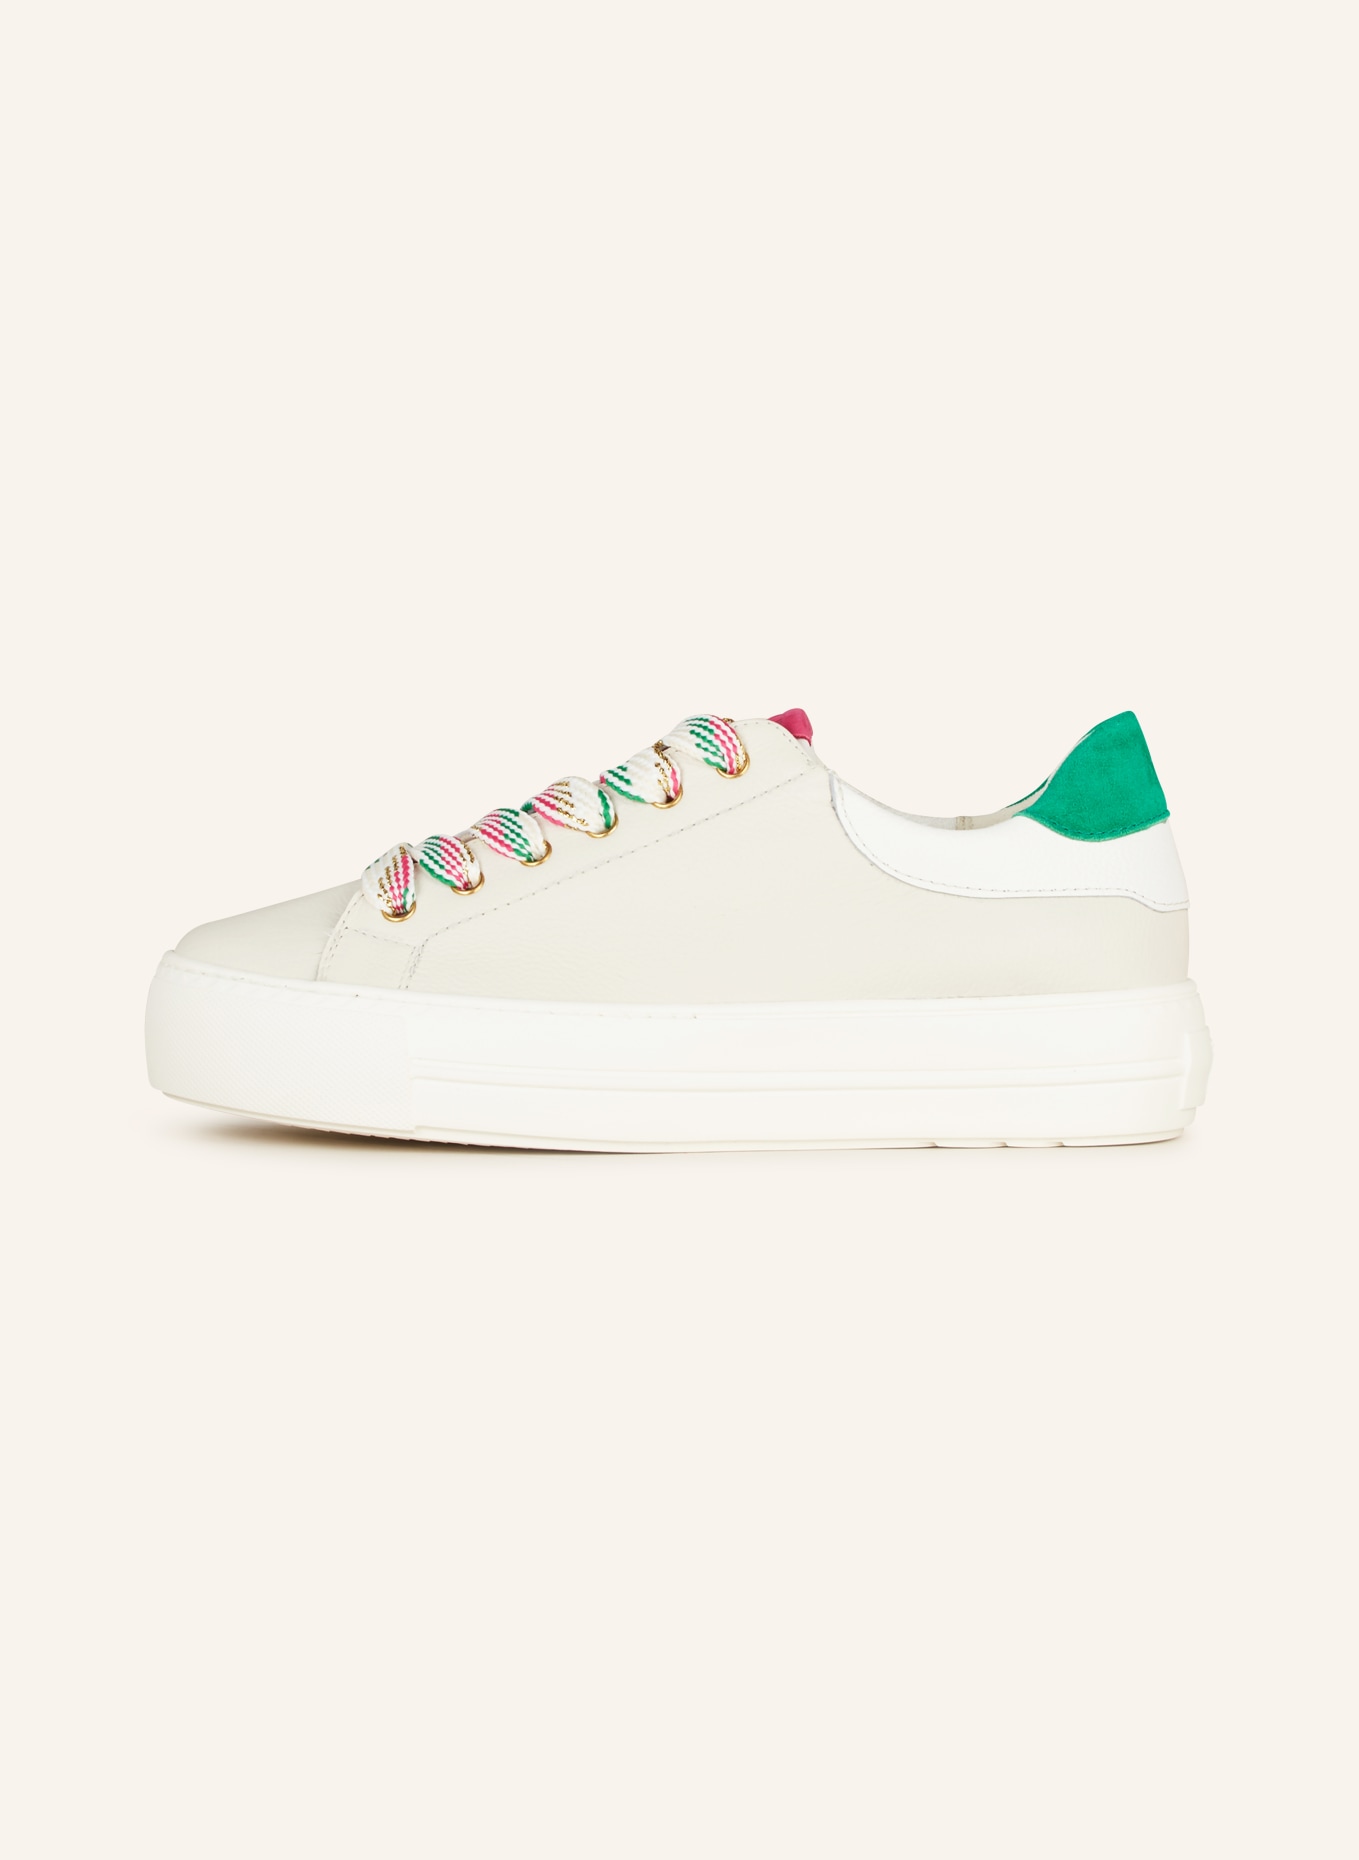 paul green Sneakers with glitter thread, Color: LIGHT GRAY/ GREEN (Image 4)